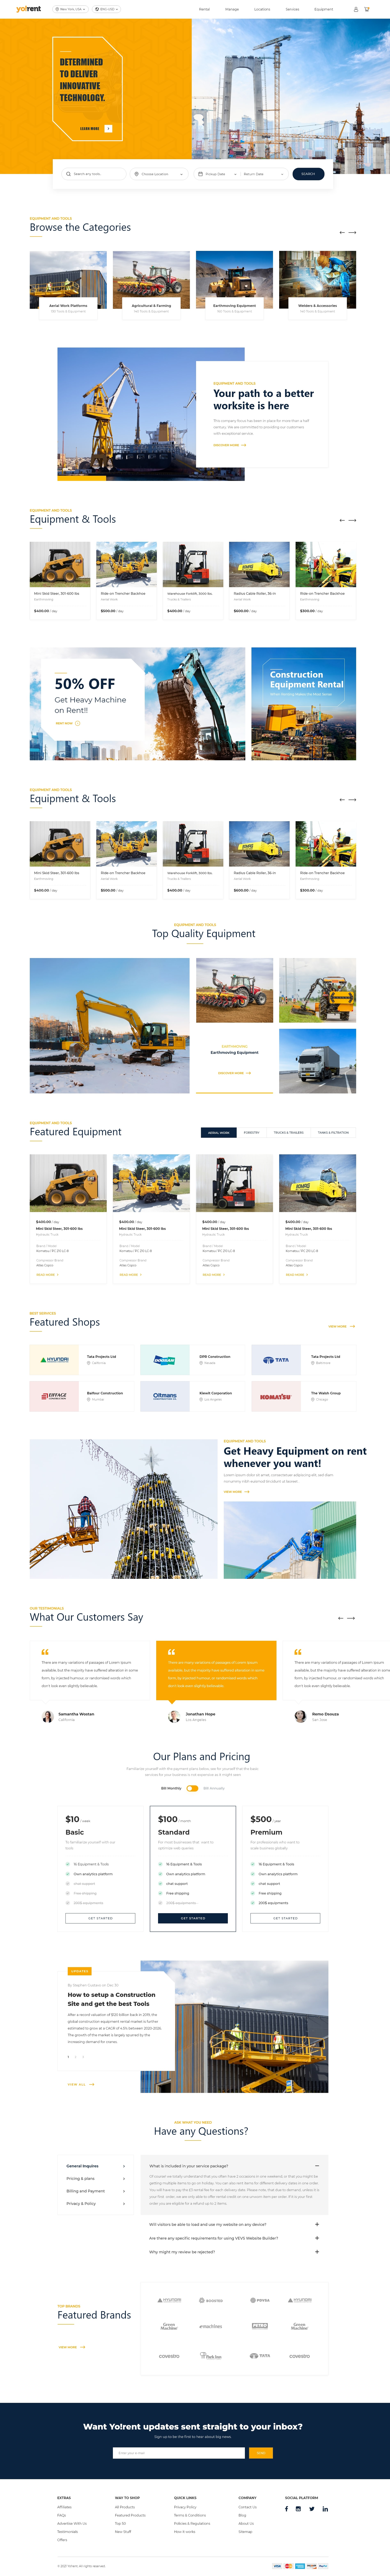 Equipment rental home page design